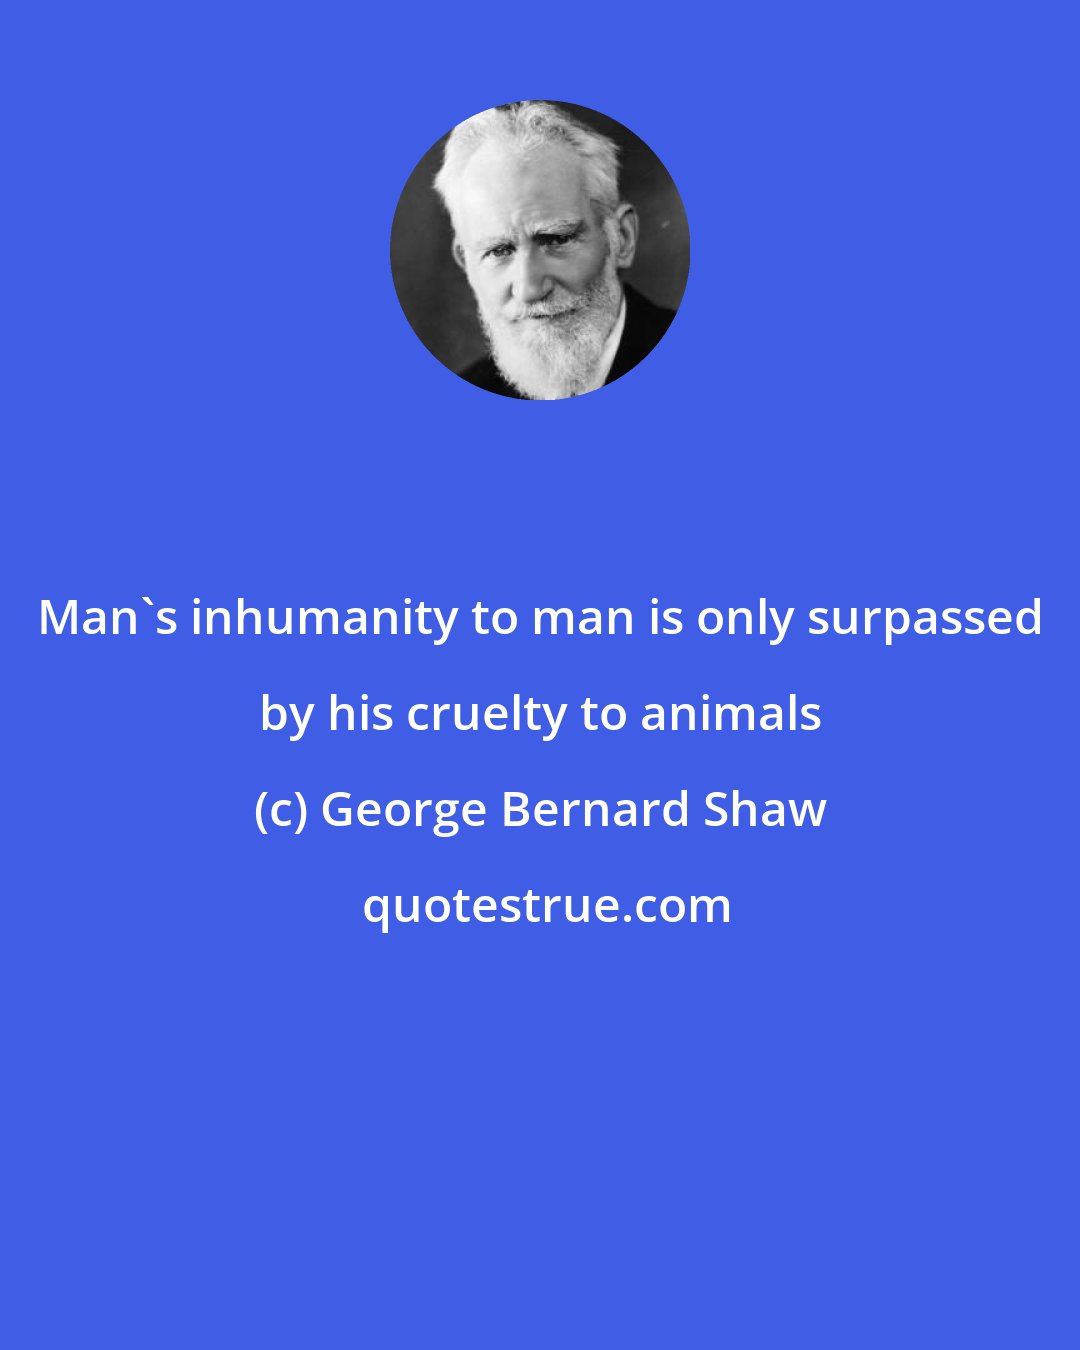 George Bernard Shaw: Man's inhumanity to man is only surpassed by his cruelty to animals